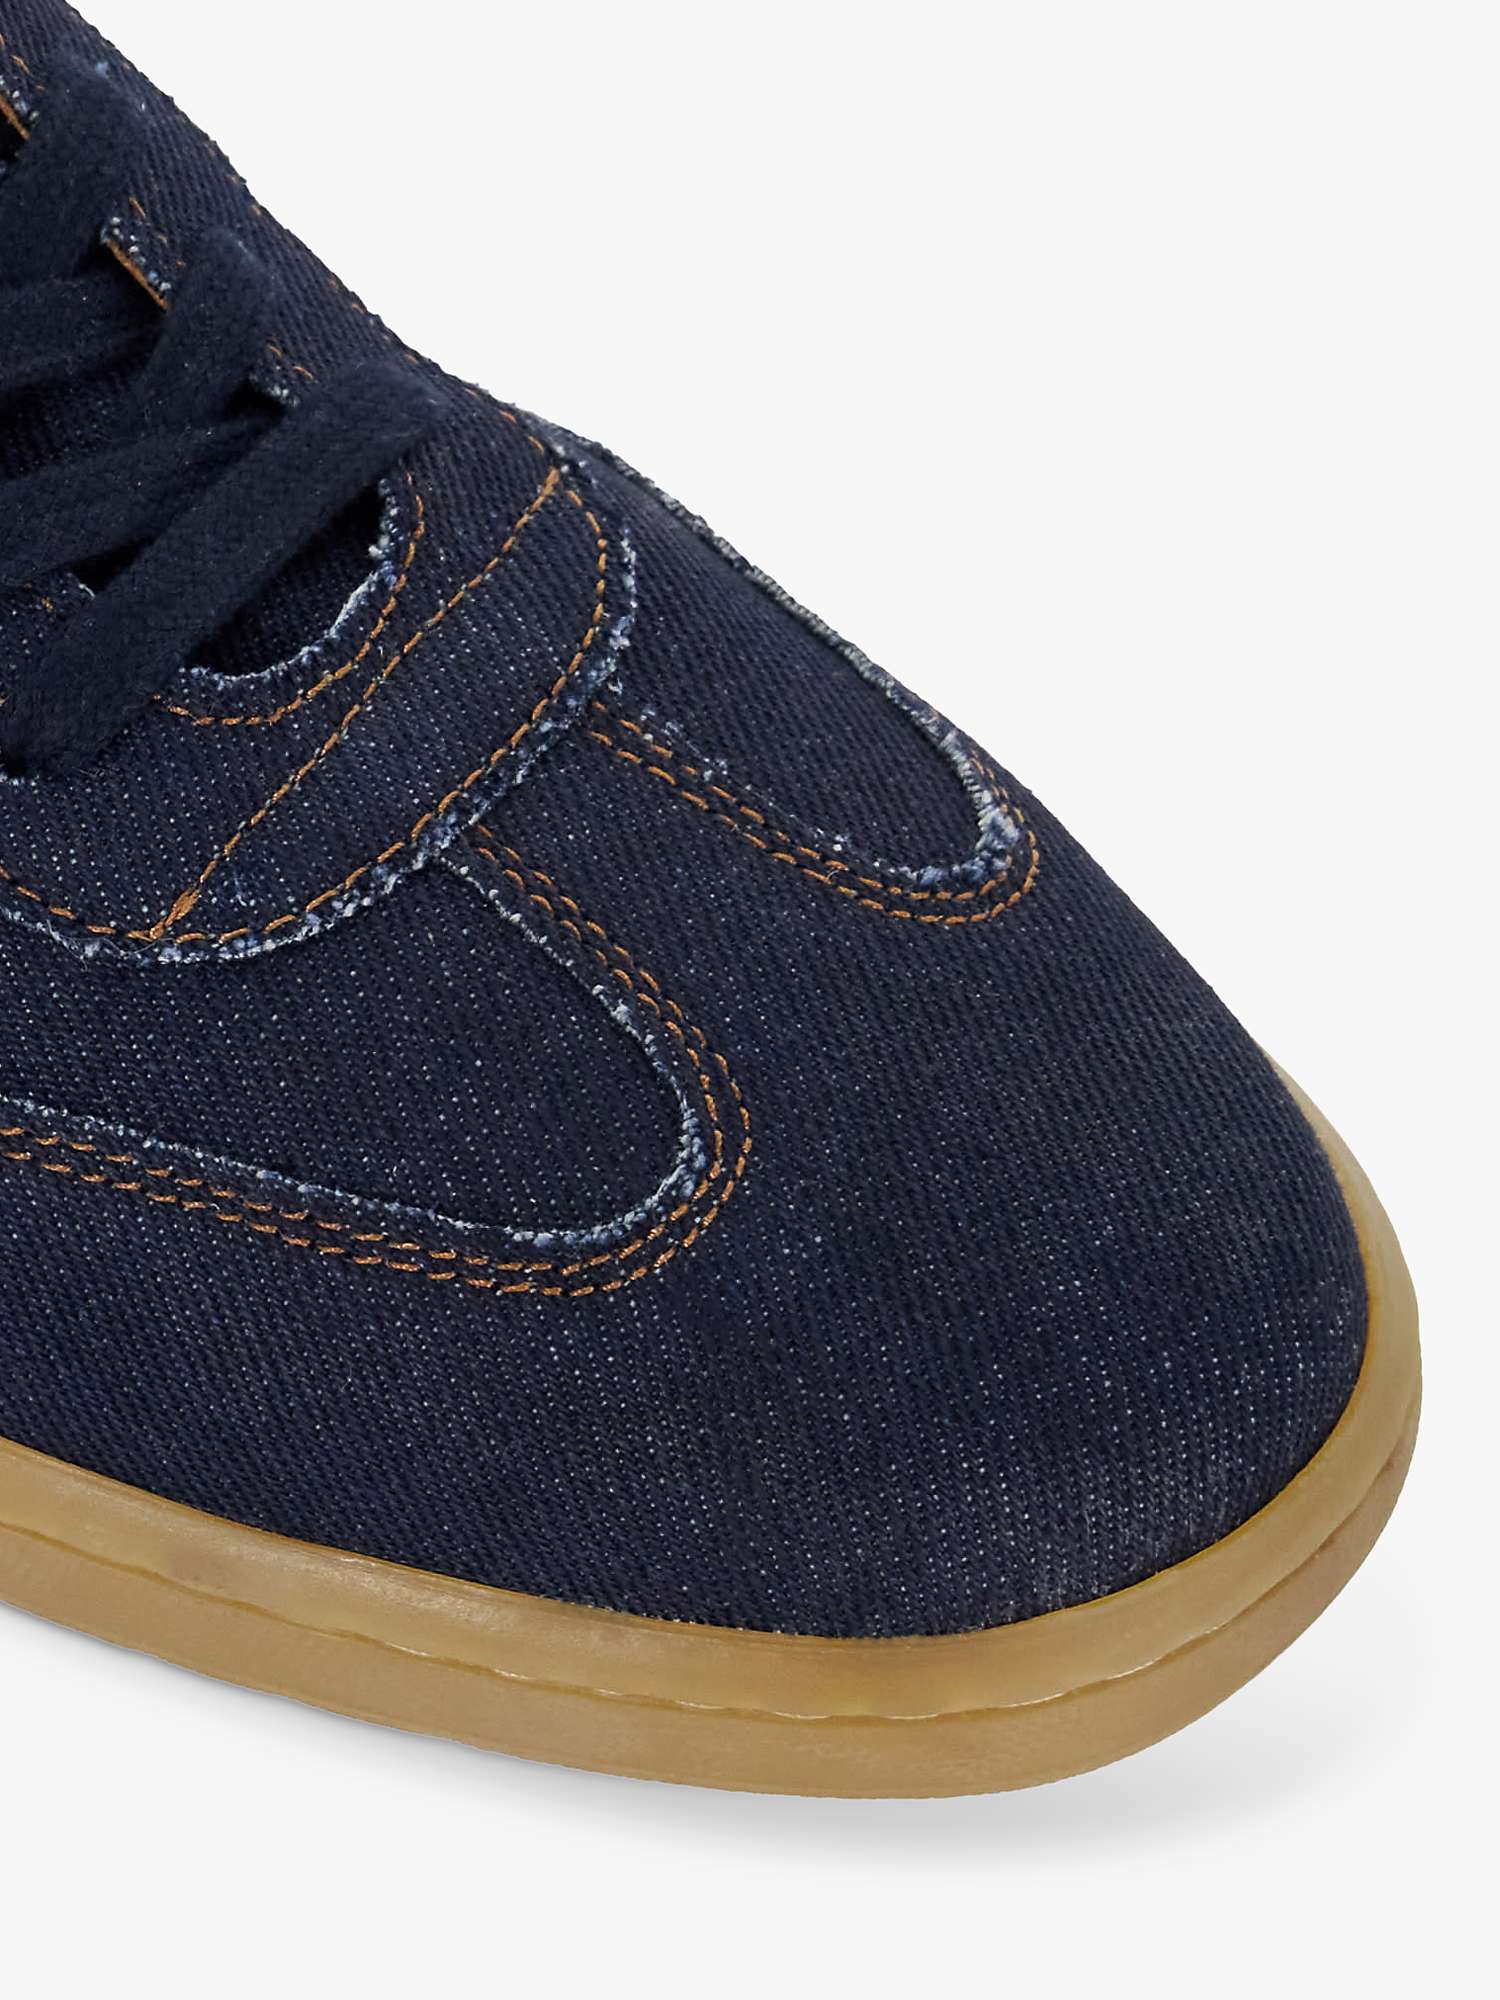 Buy Dune Torress Suede Low Profile Retro Trainers, Blue Online at johnlewis.com